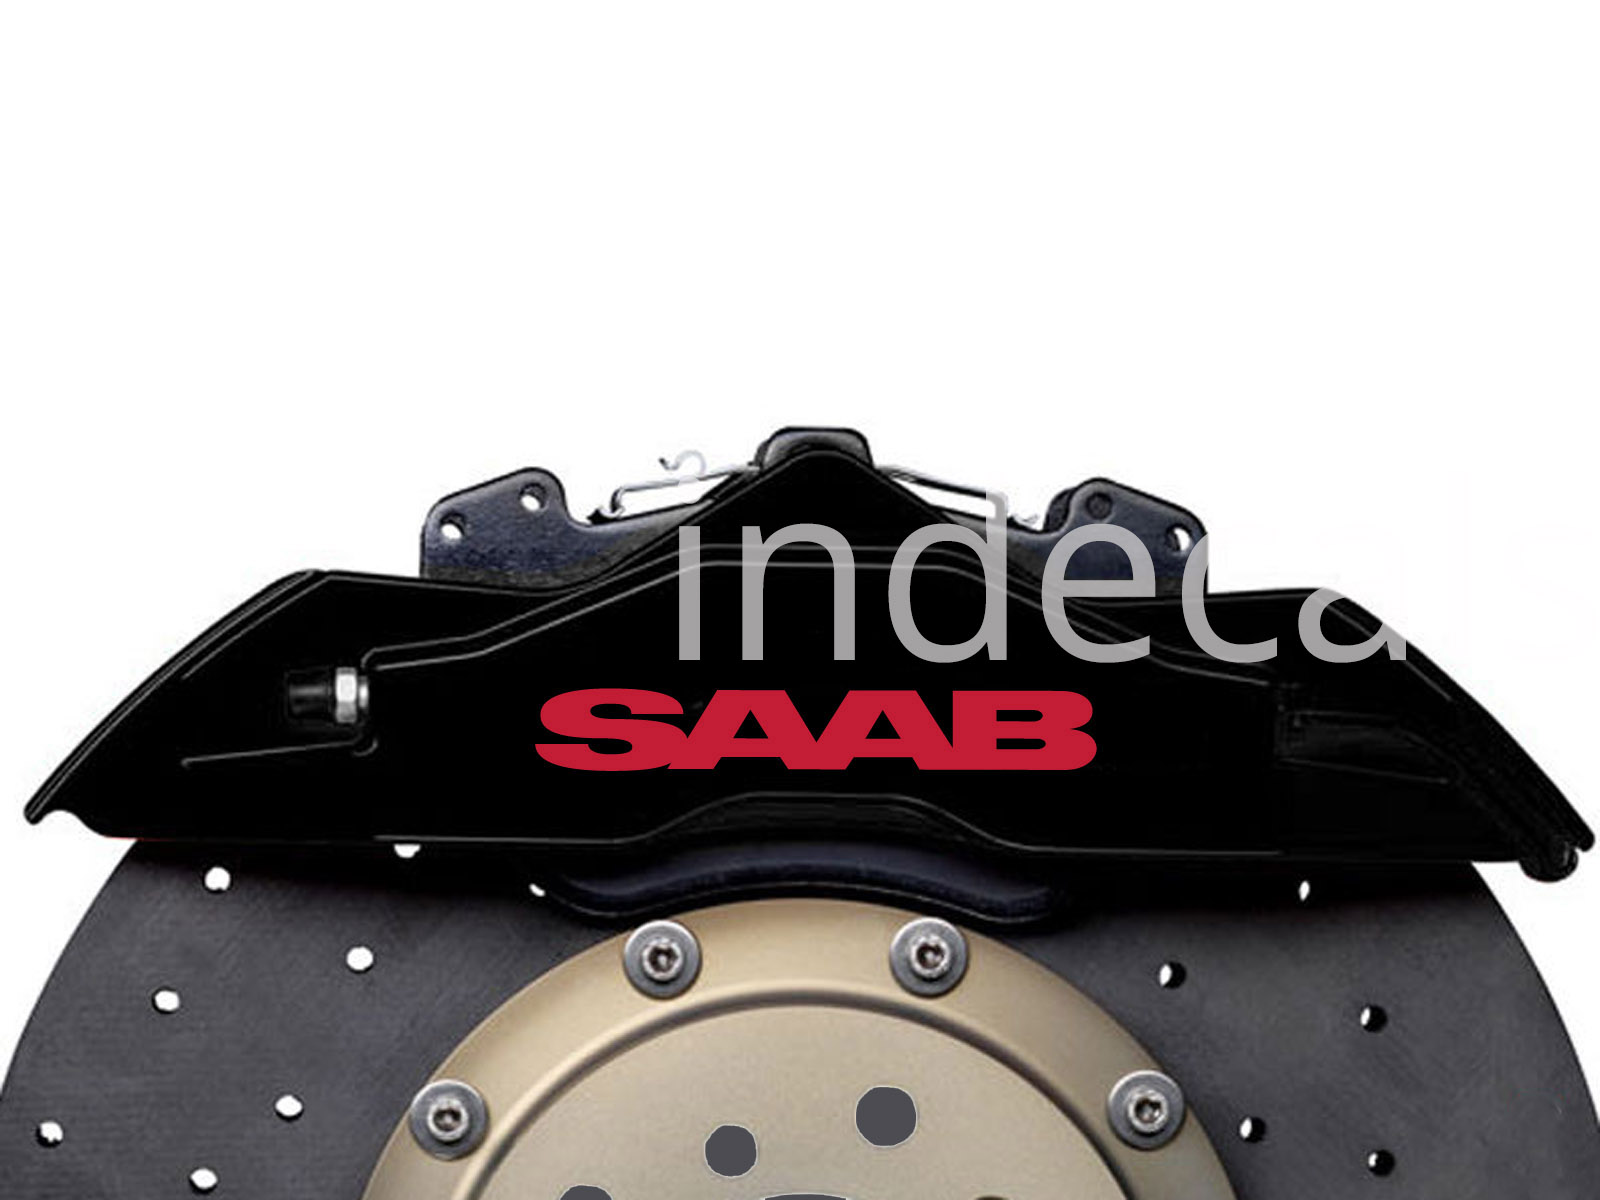 6 x Saab Stickers for Brakes - Red